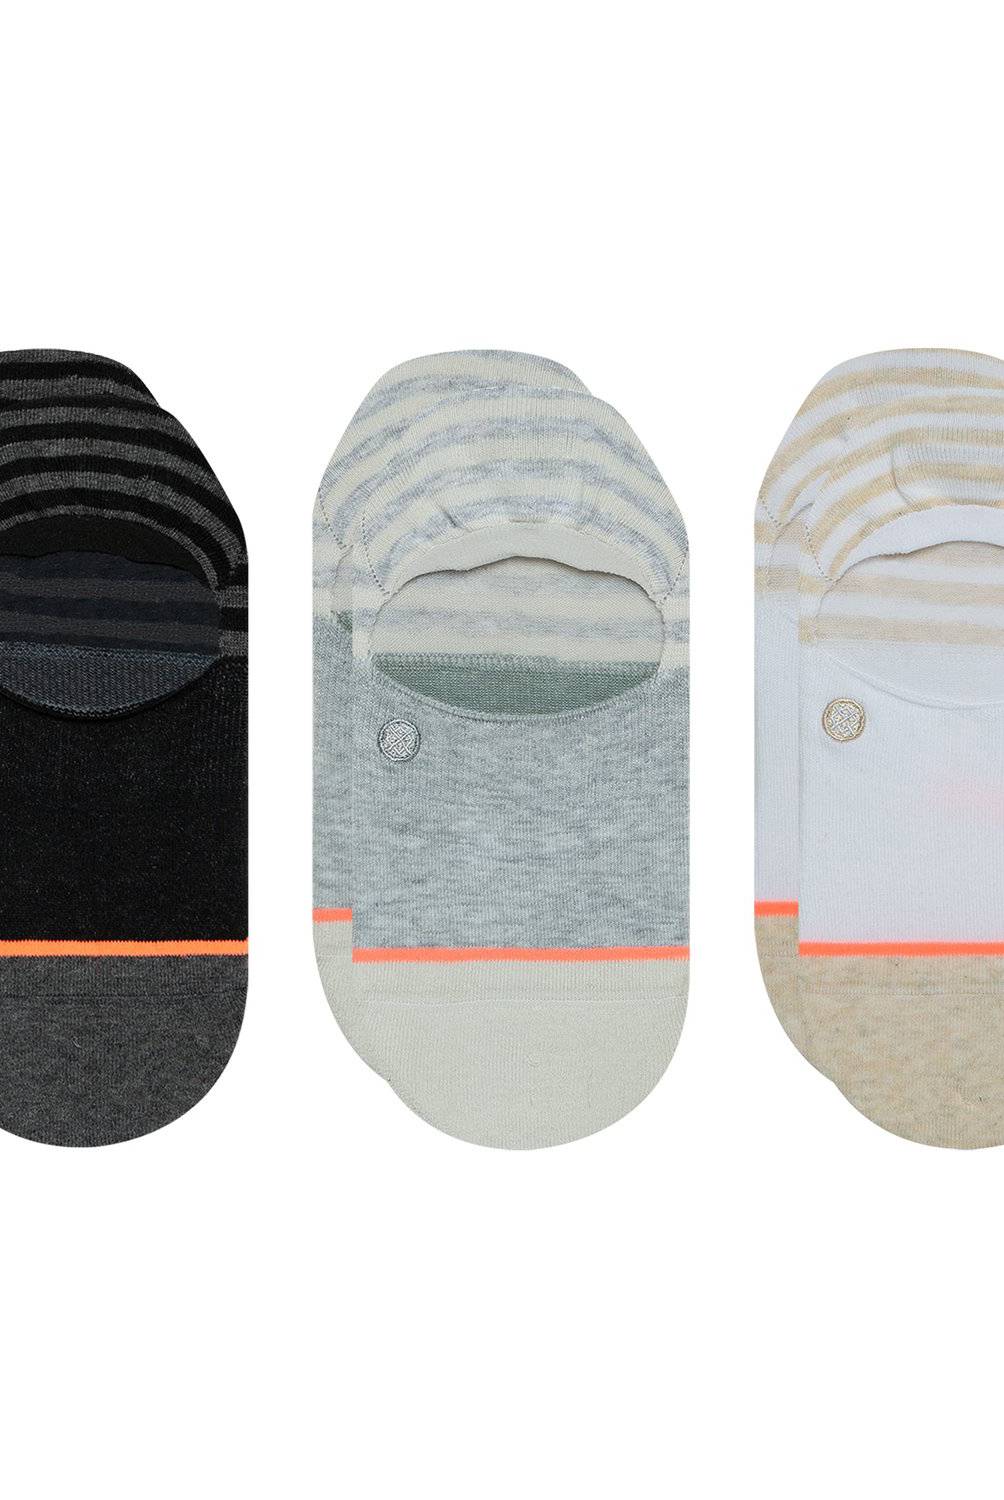 STANCE - Pack 3 Calcetines